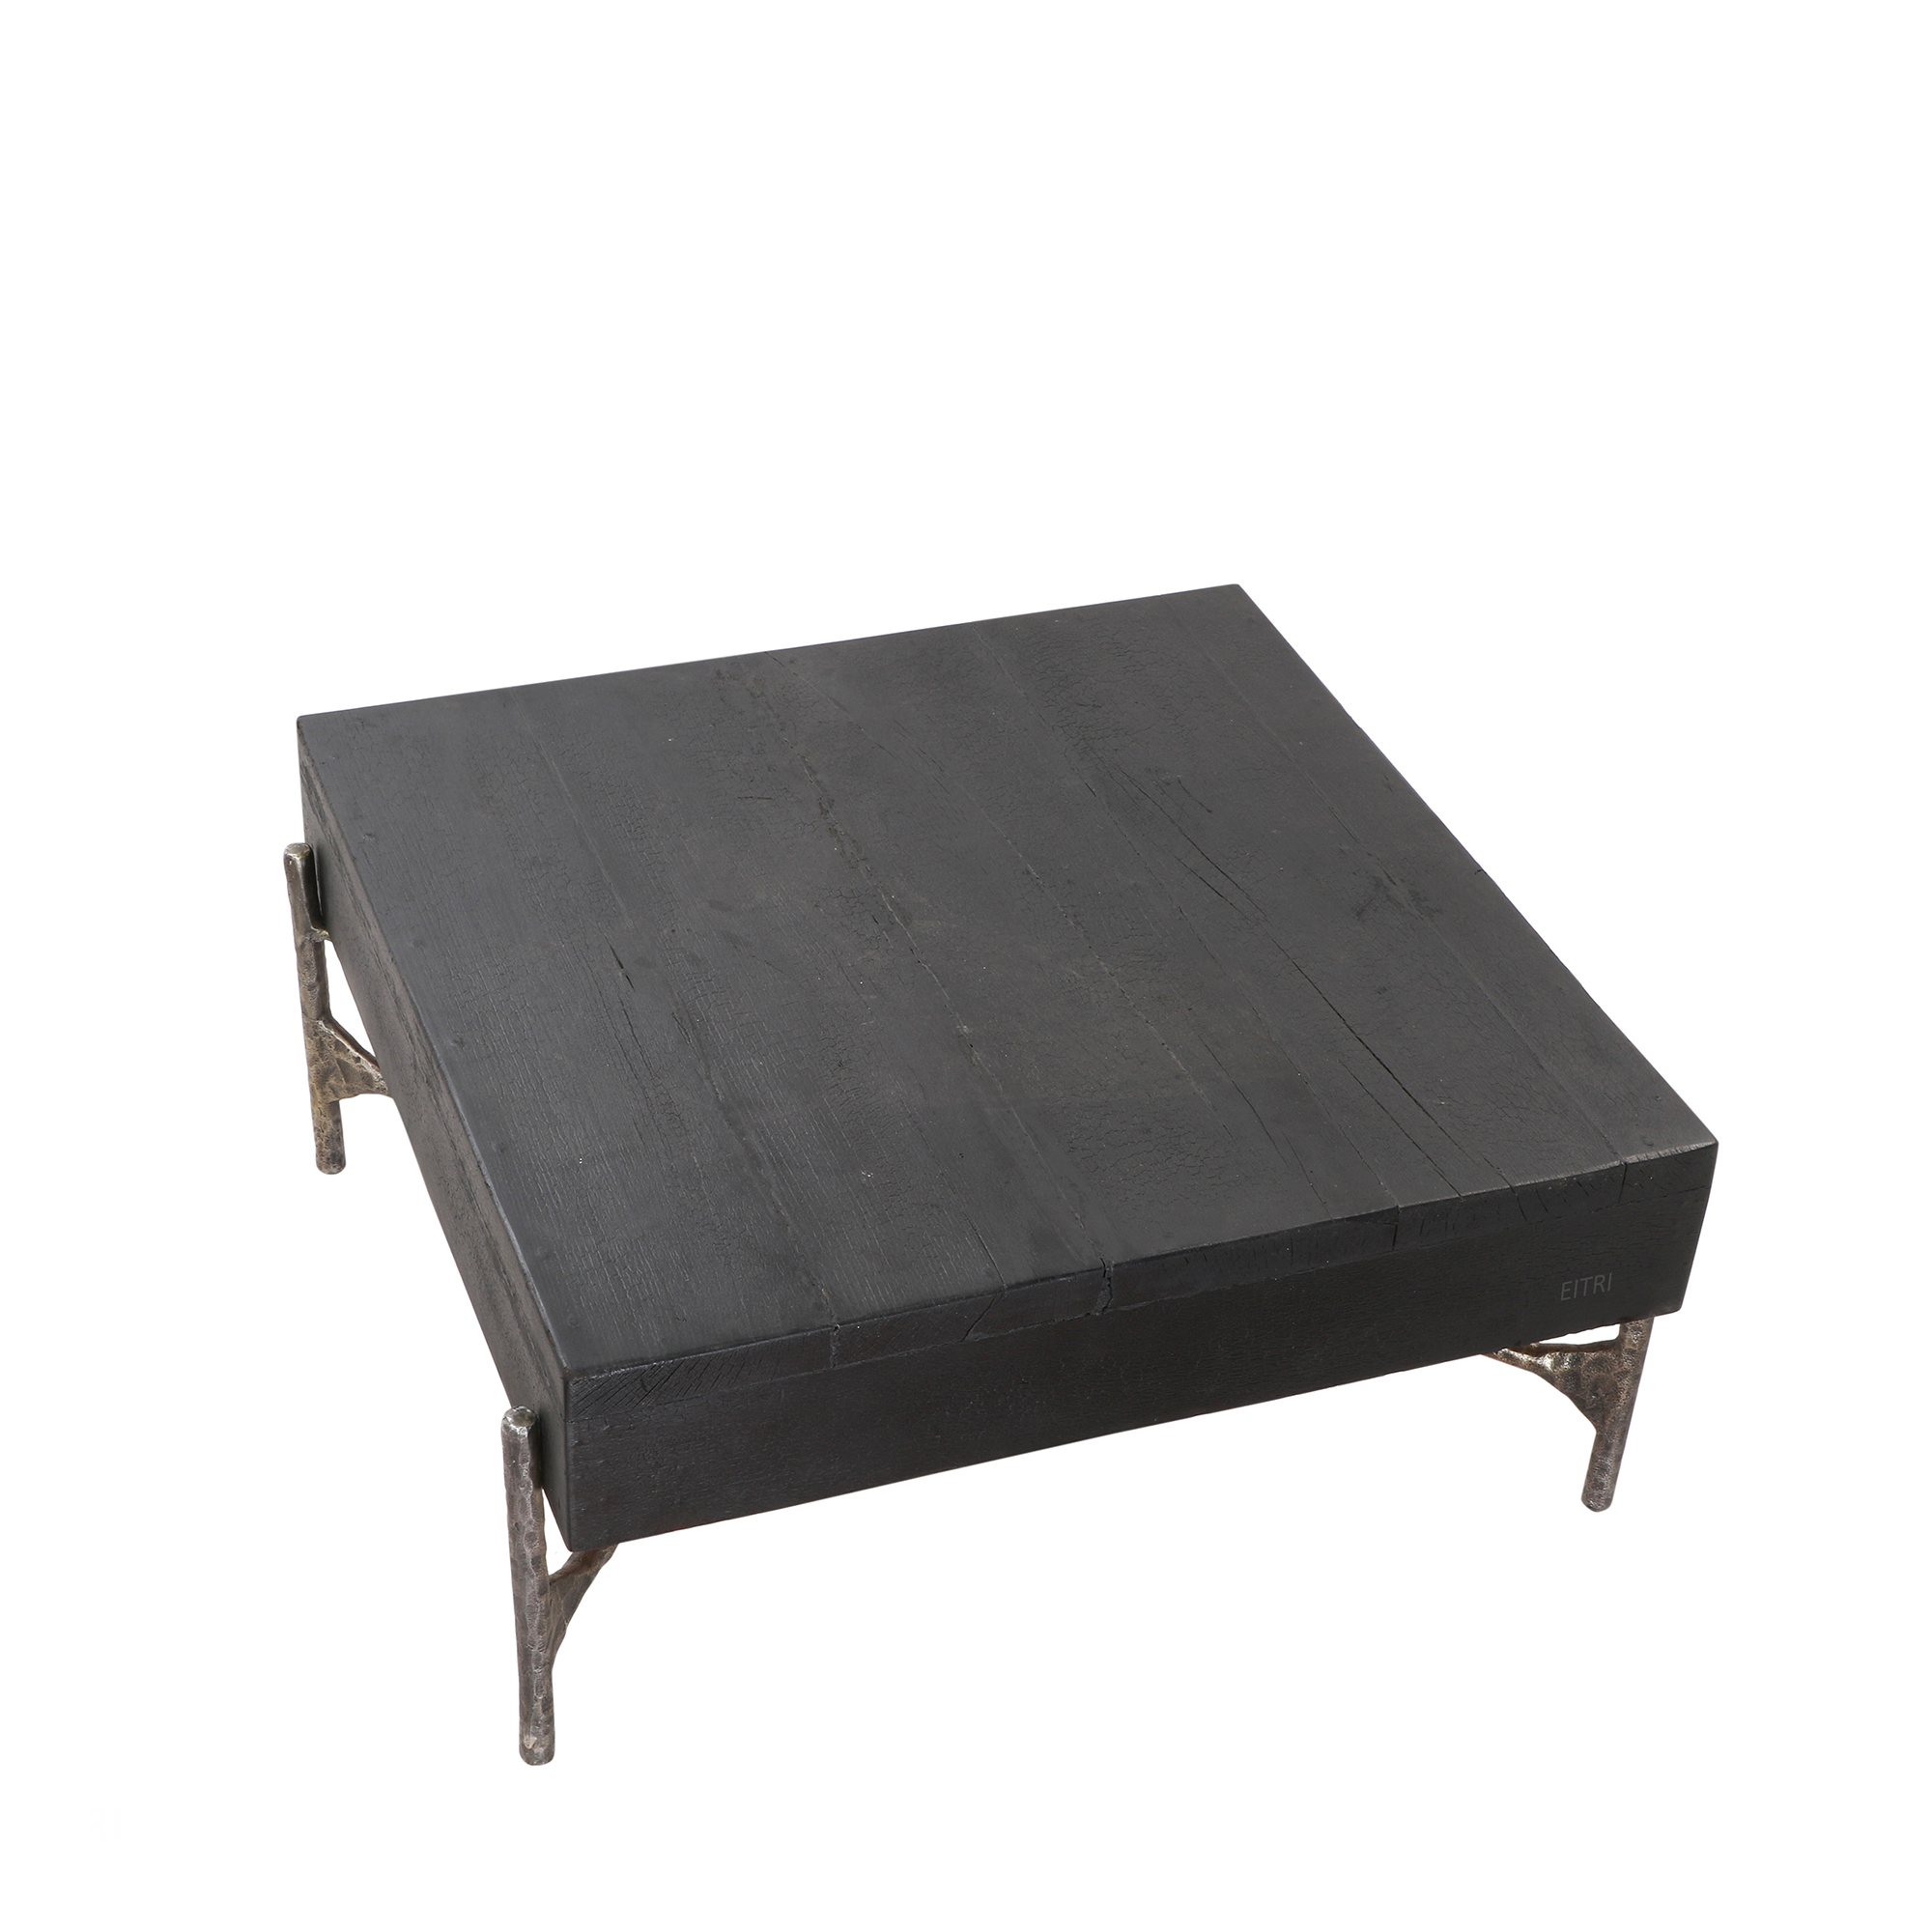  Carbon-12 Coffee Table Square 